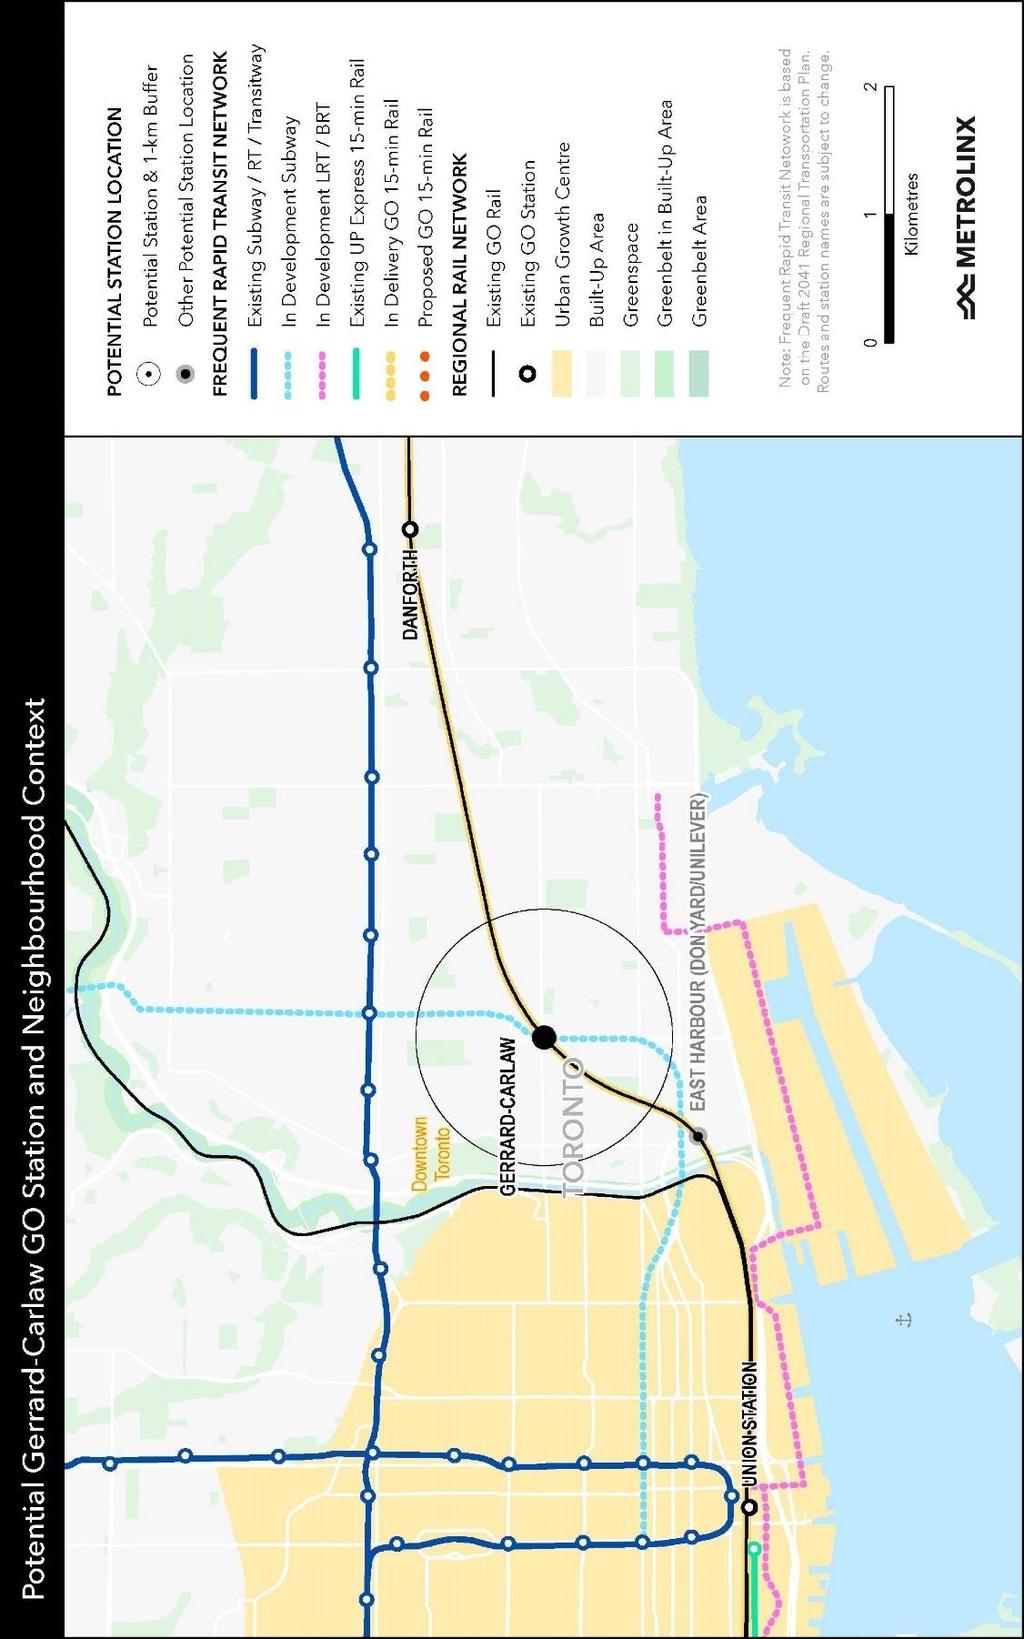 5.4 Proposed GO Station and Neighbourhood Context Area